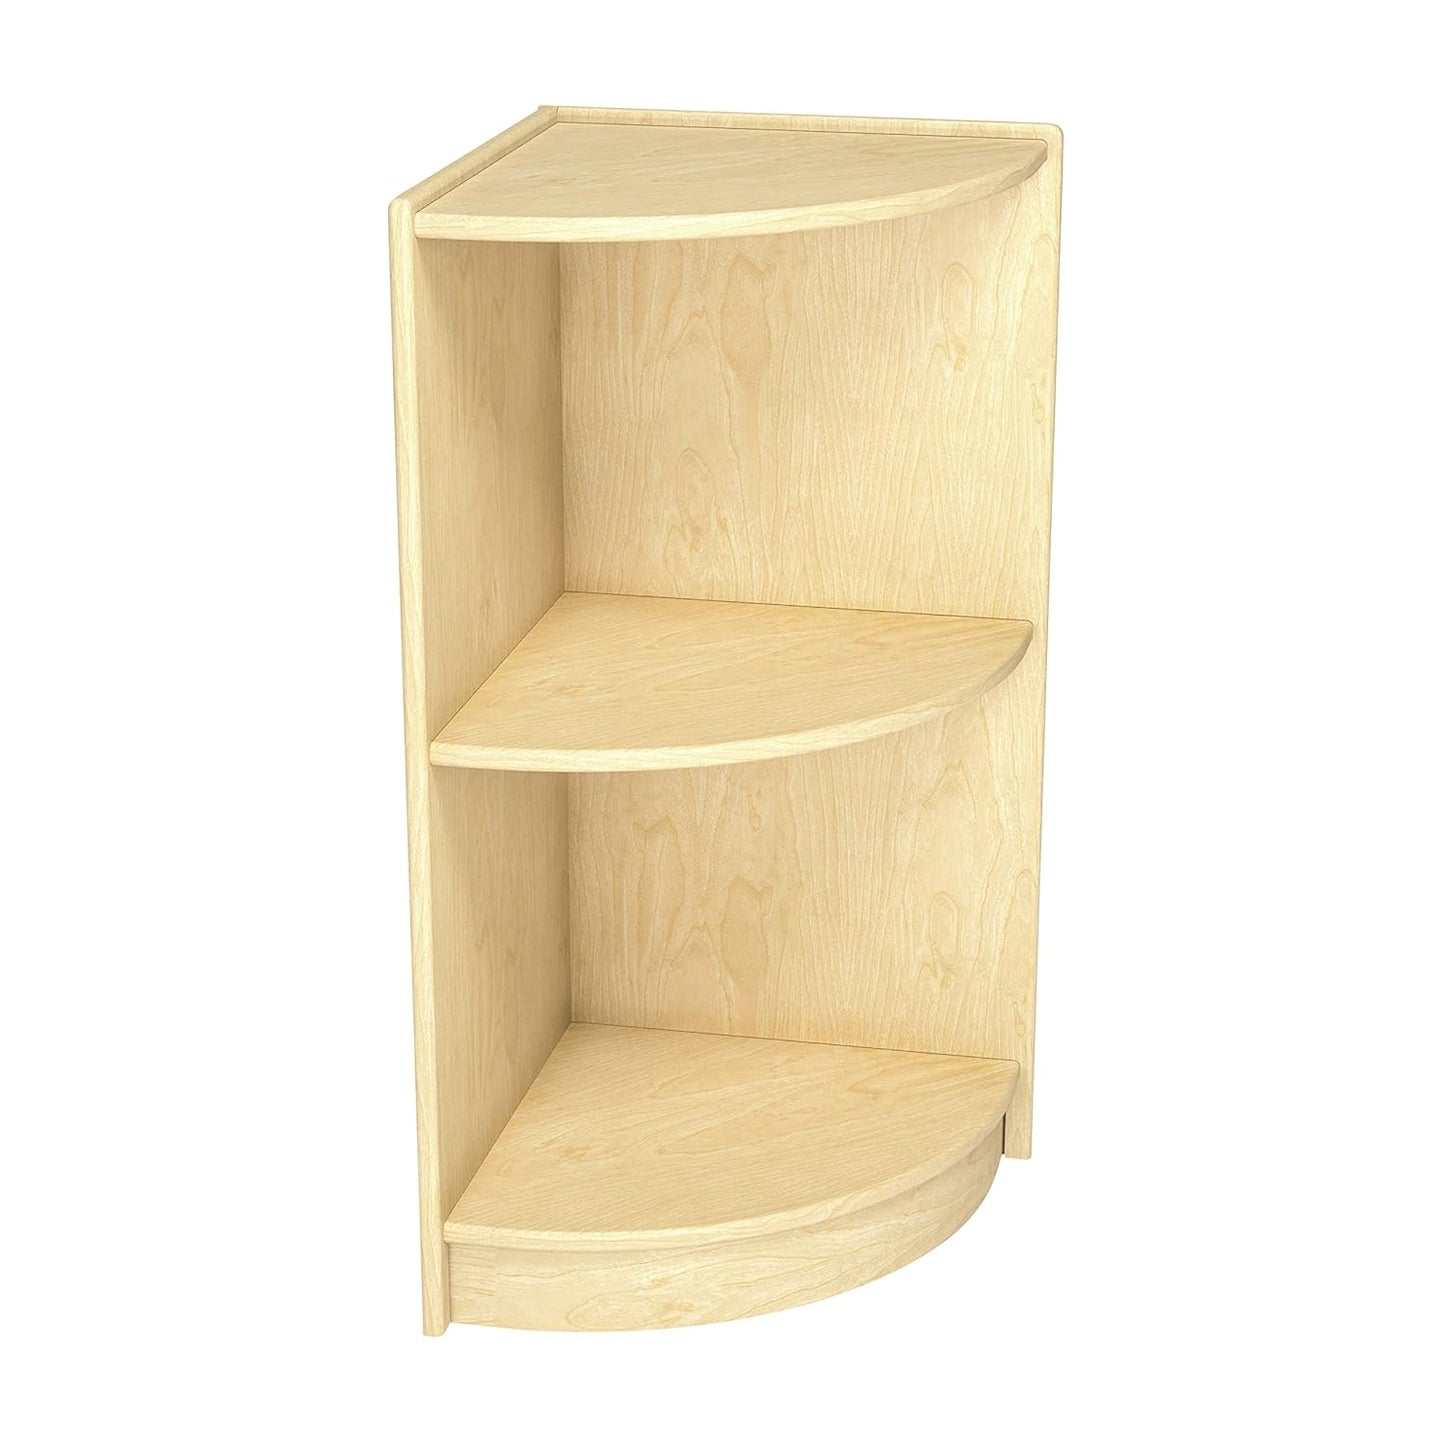 Toddler outside Corner Unit, 14-1/4 X 14-1/4 X 24 Inches